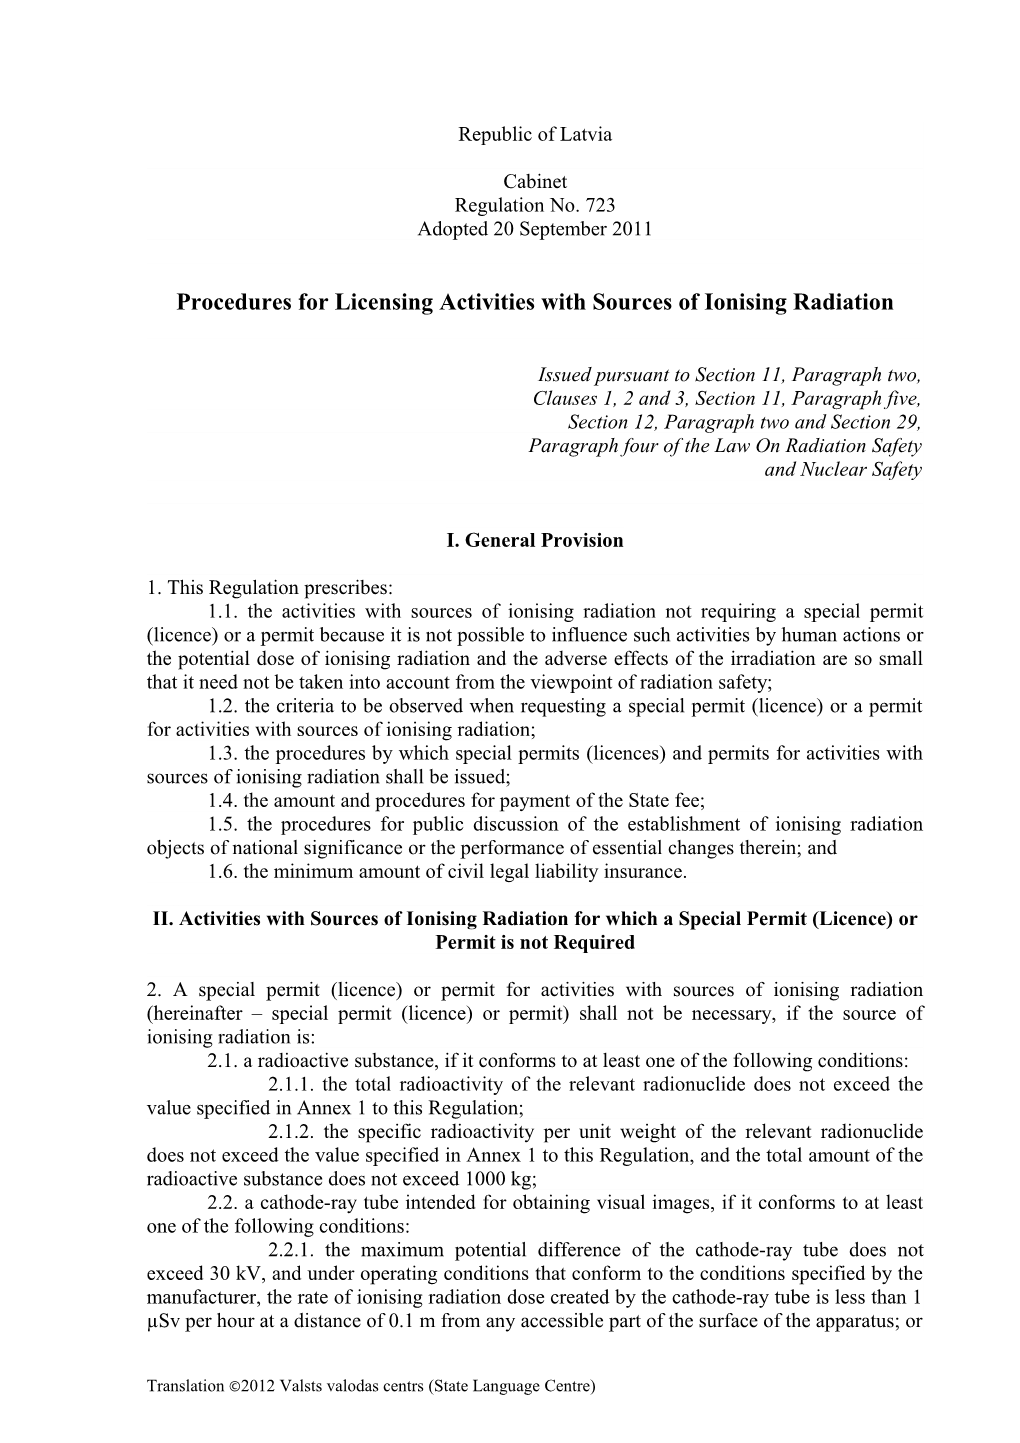 Procedures for Licensing Activities with Sources of Ionising Radiation